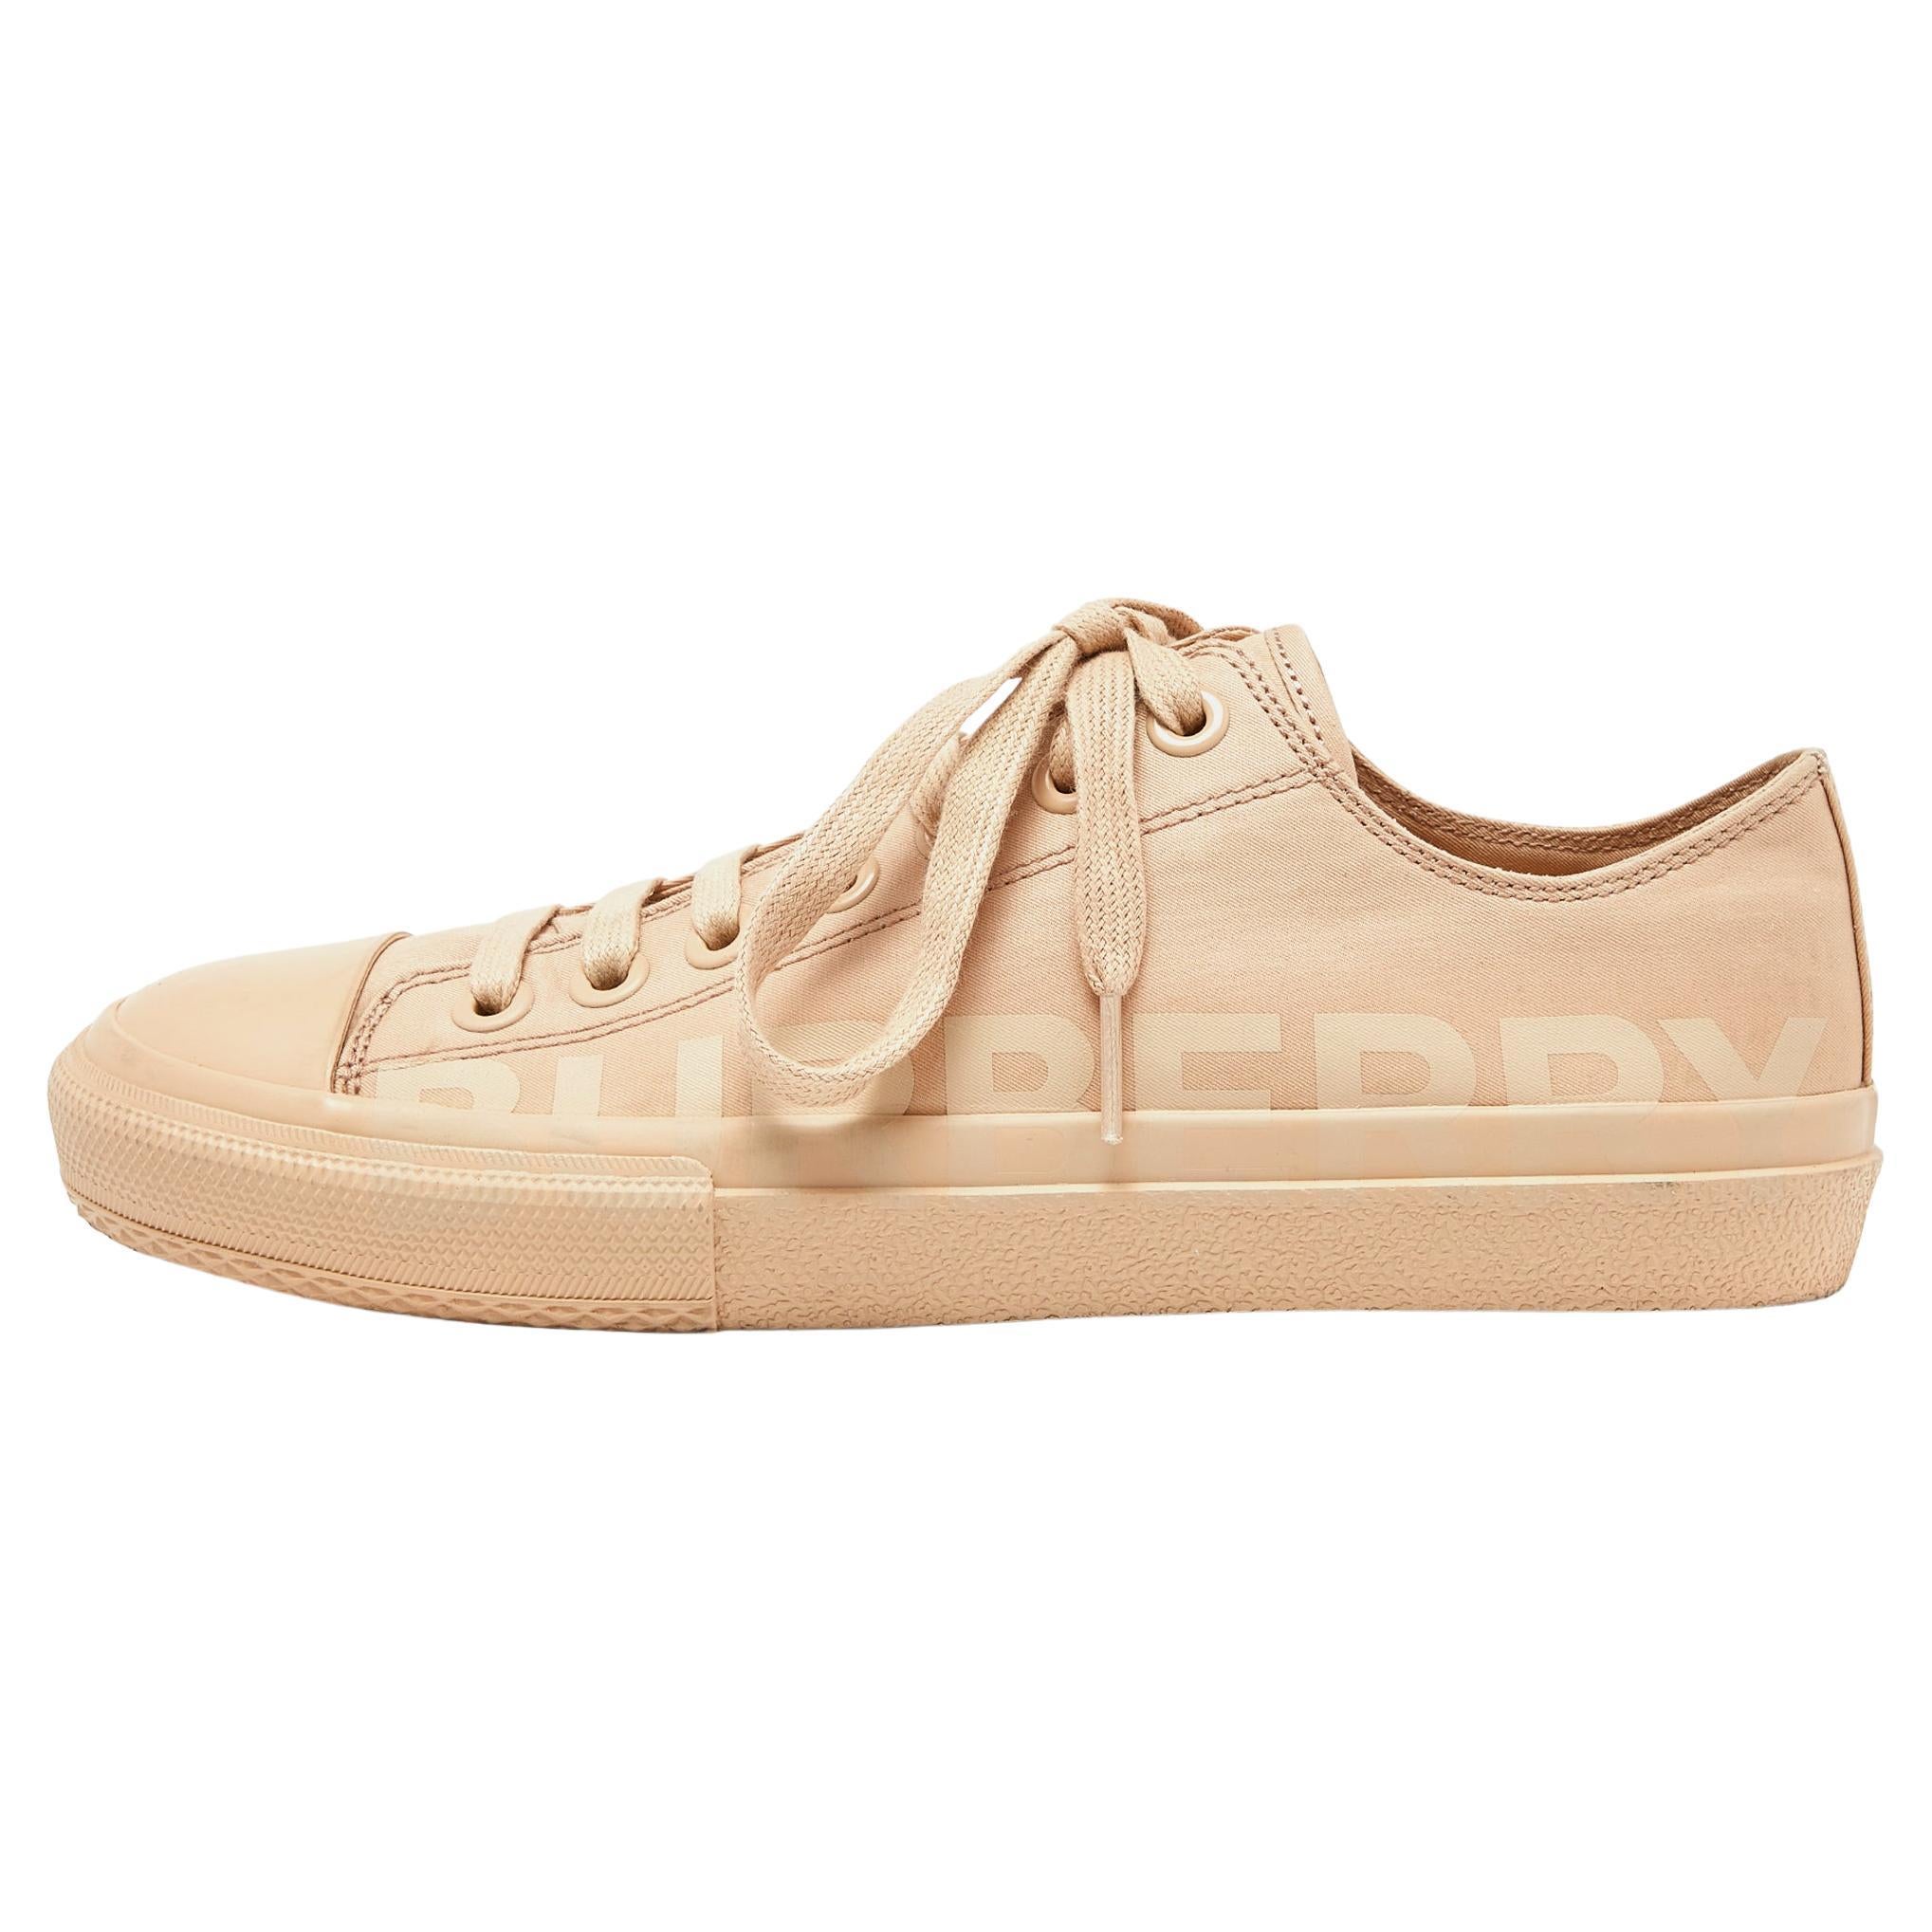 Burberry Beige Logo Print Canvas Sneakers Size 39 For Sale